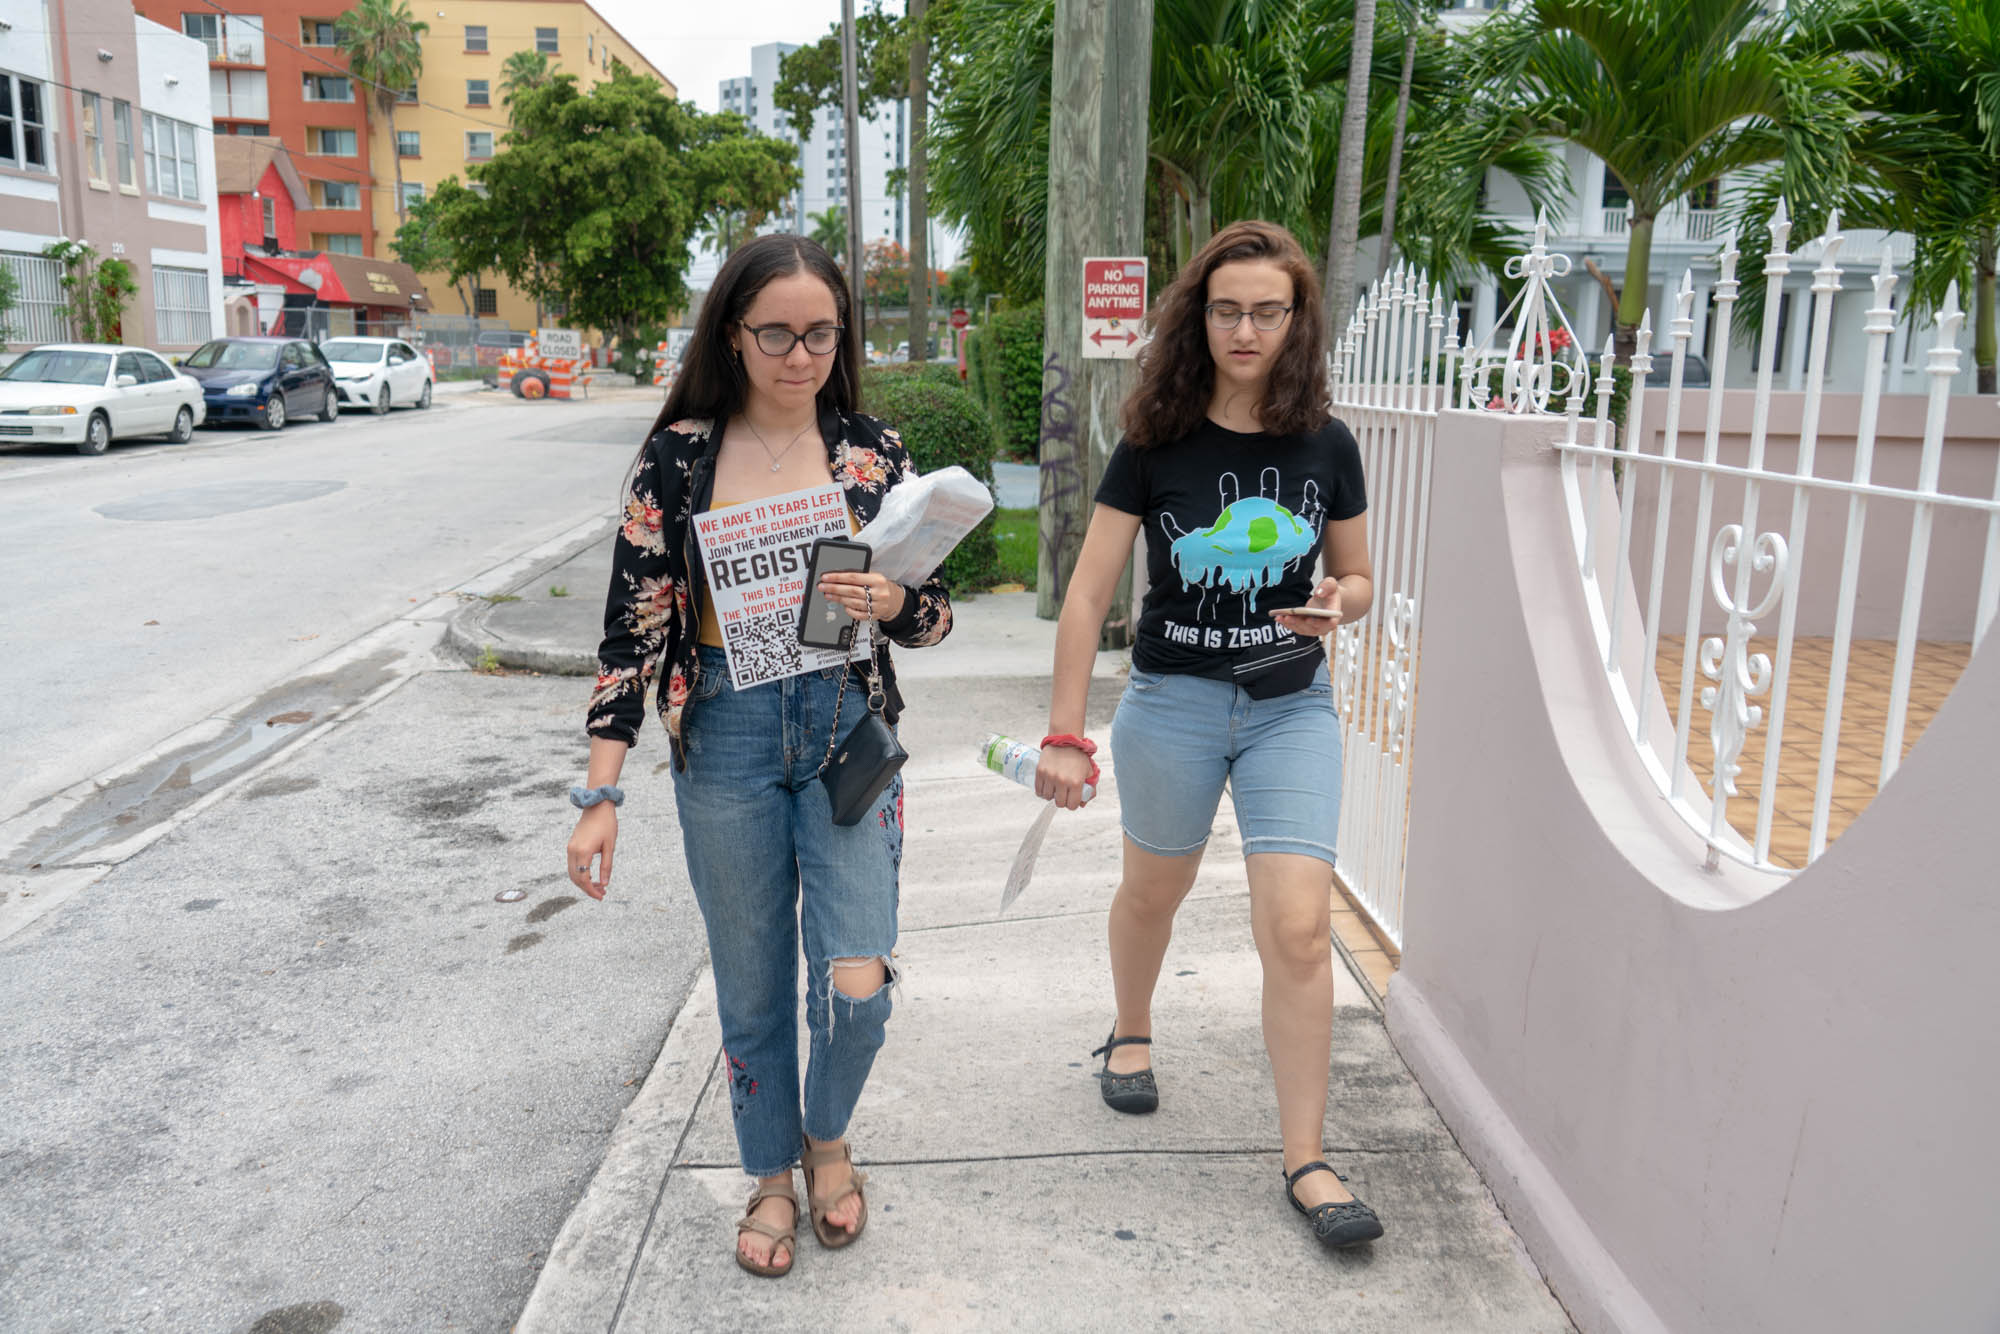 Sohayla Eldeeb (left) and Jamie Margolin of the activist group Zero Hour hung posters and distributed flyers around Miami to drum up interest in the Youth Climate Summit in July.
(Jordan Laird/News21)